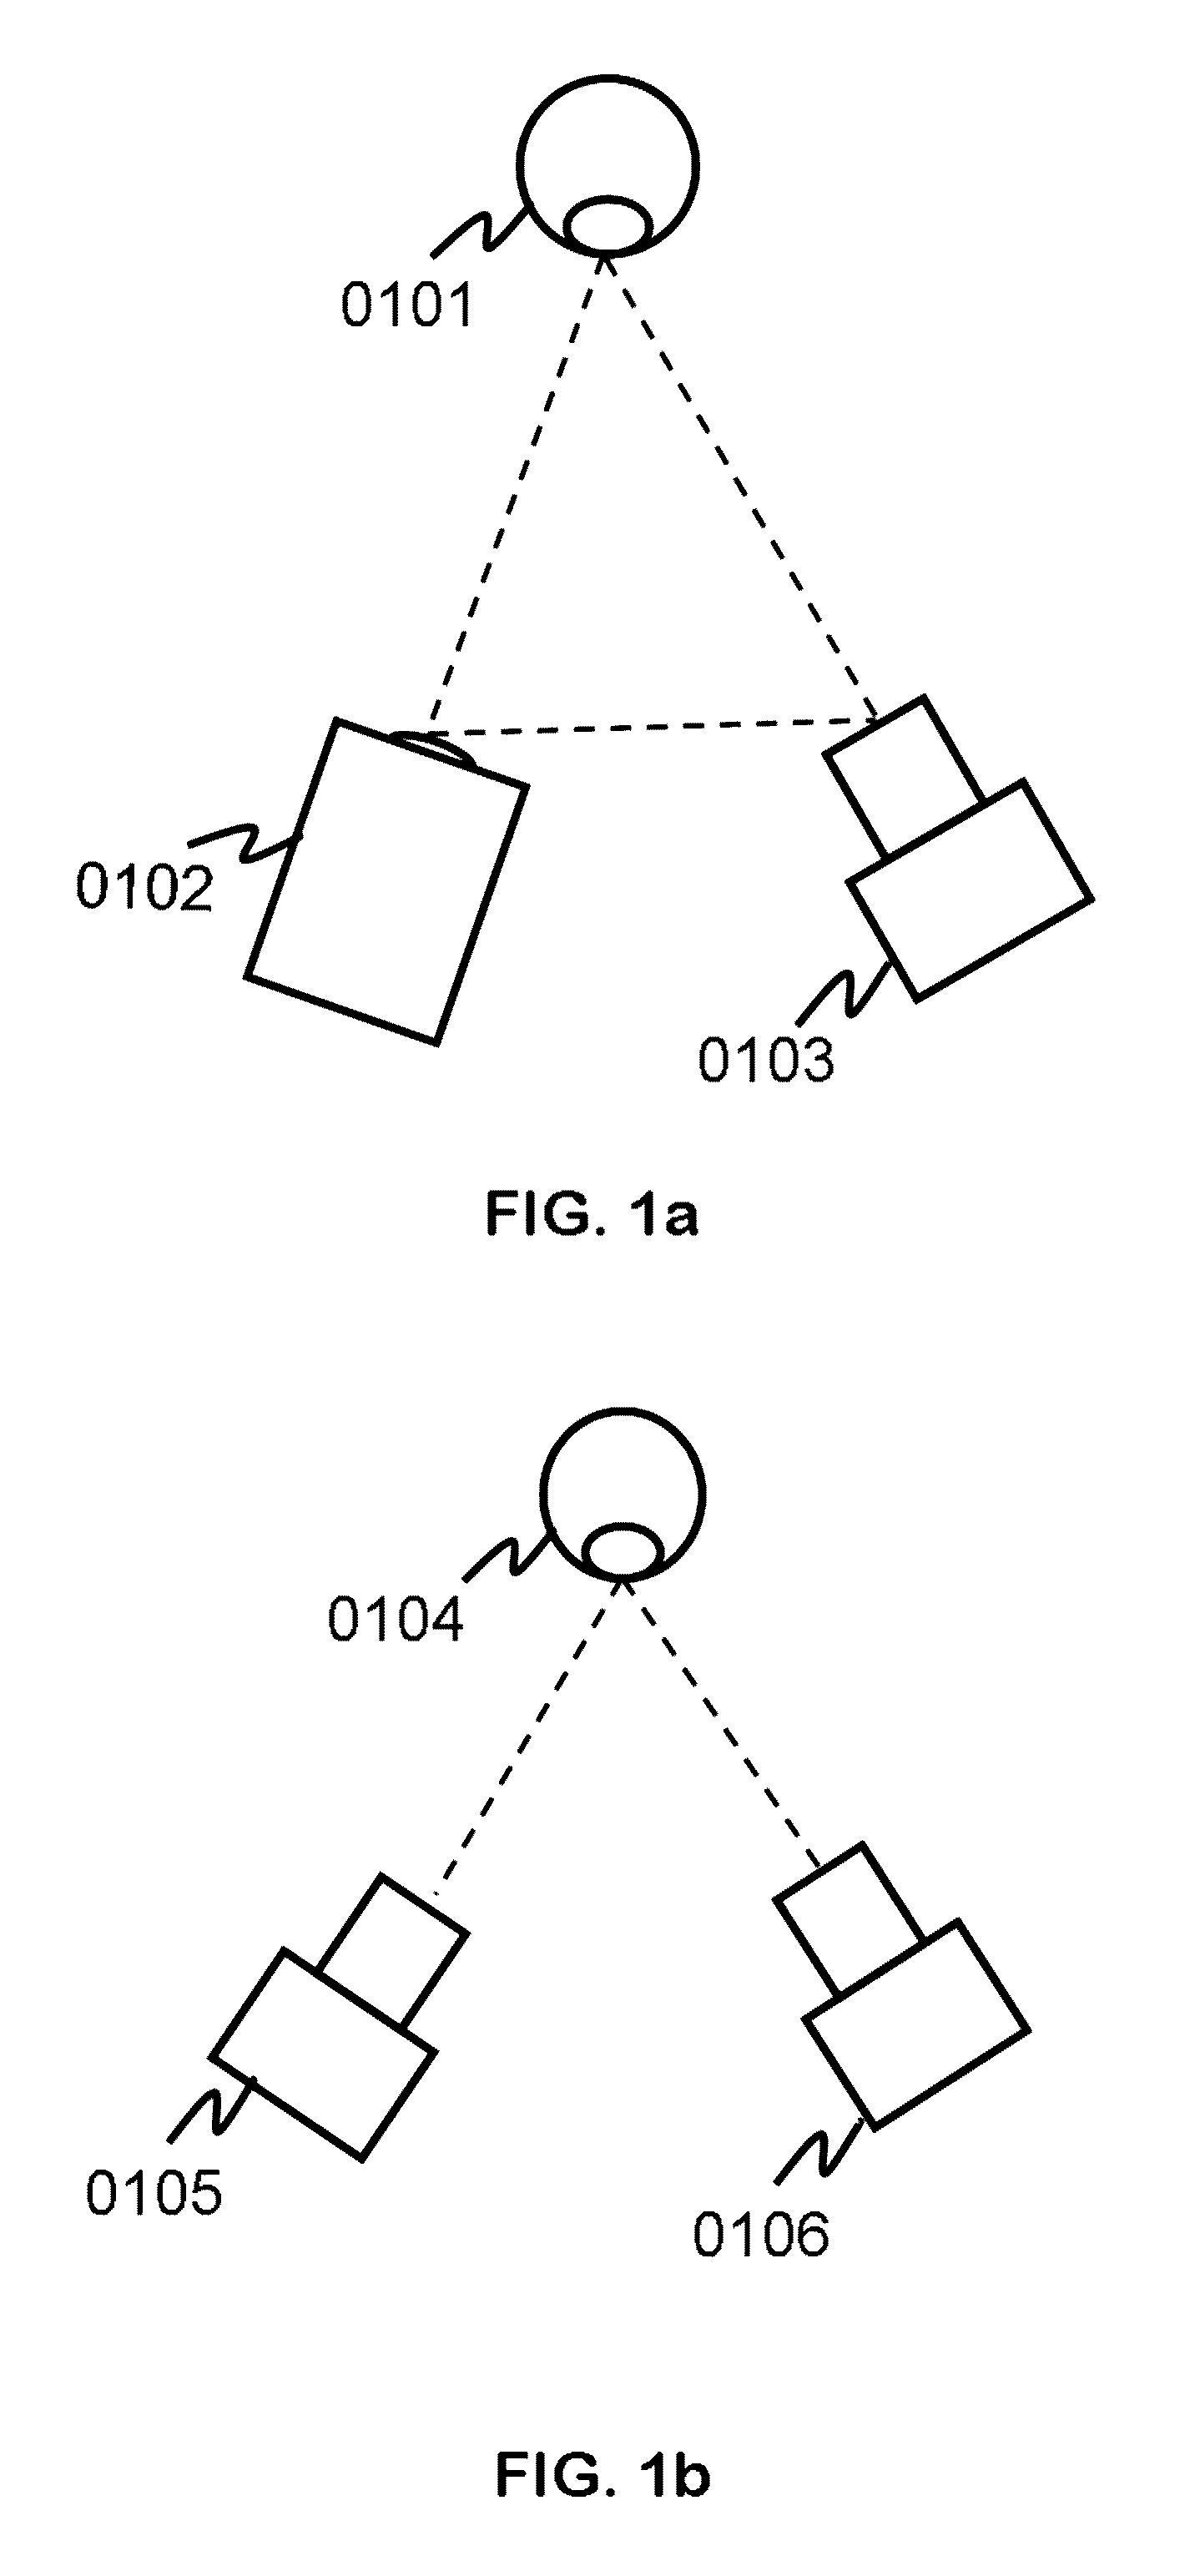 Systems and methods for mapping the ocular surface